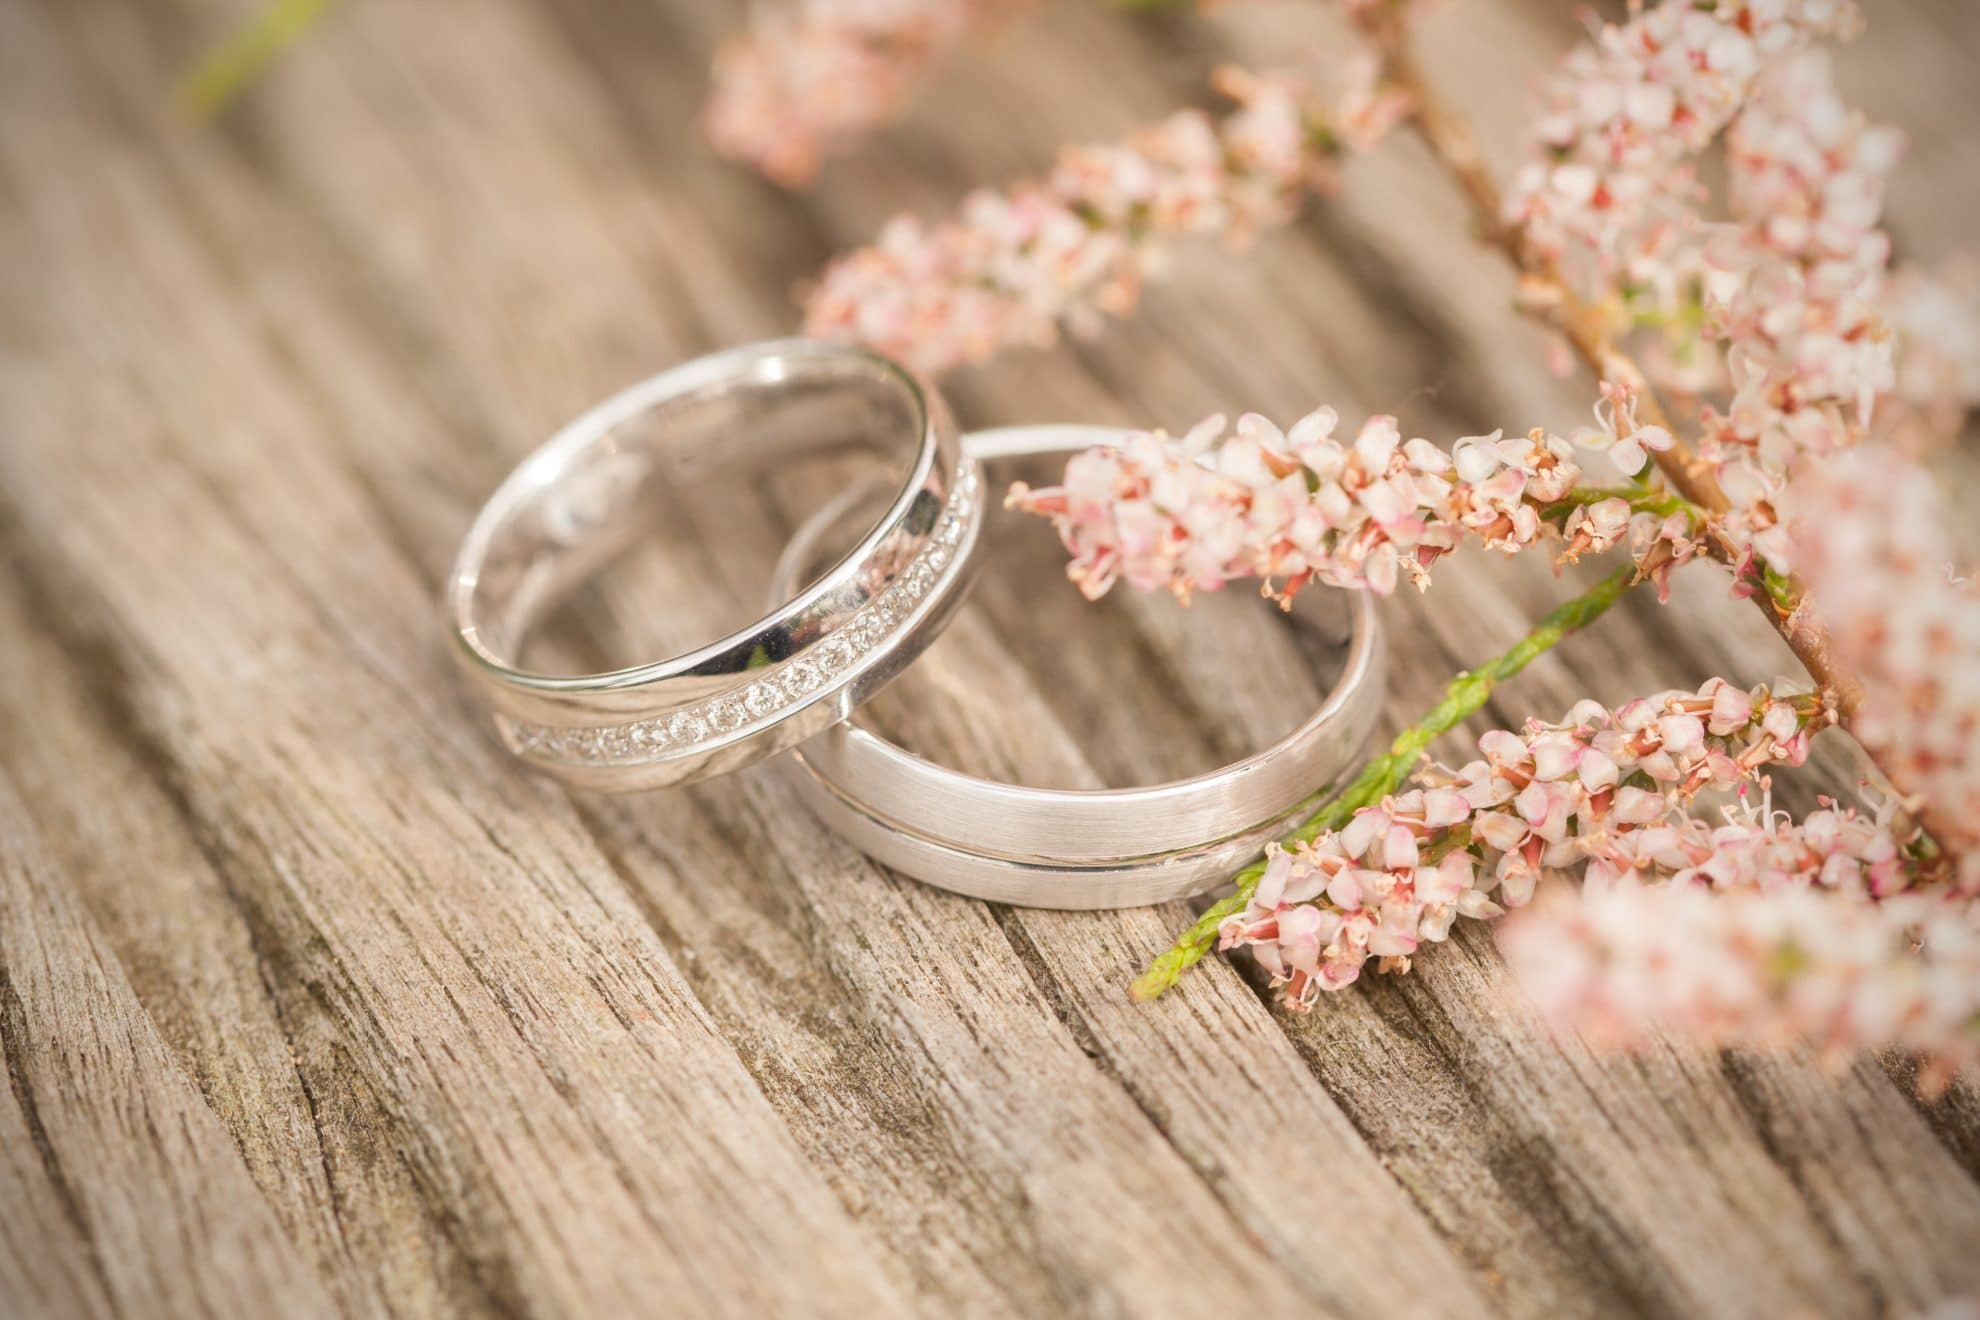 Two wedding rings sit on a table with pink flowers beside them.